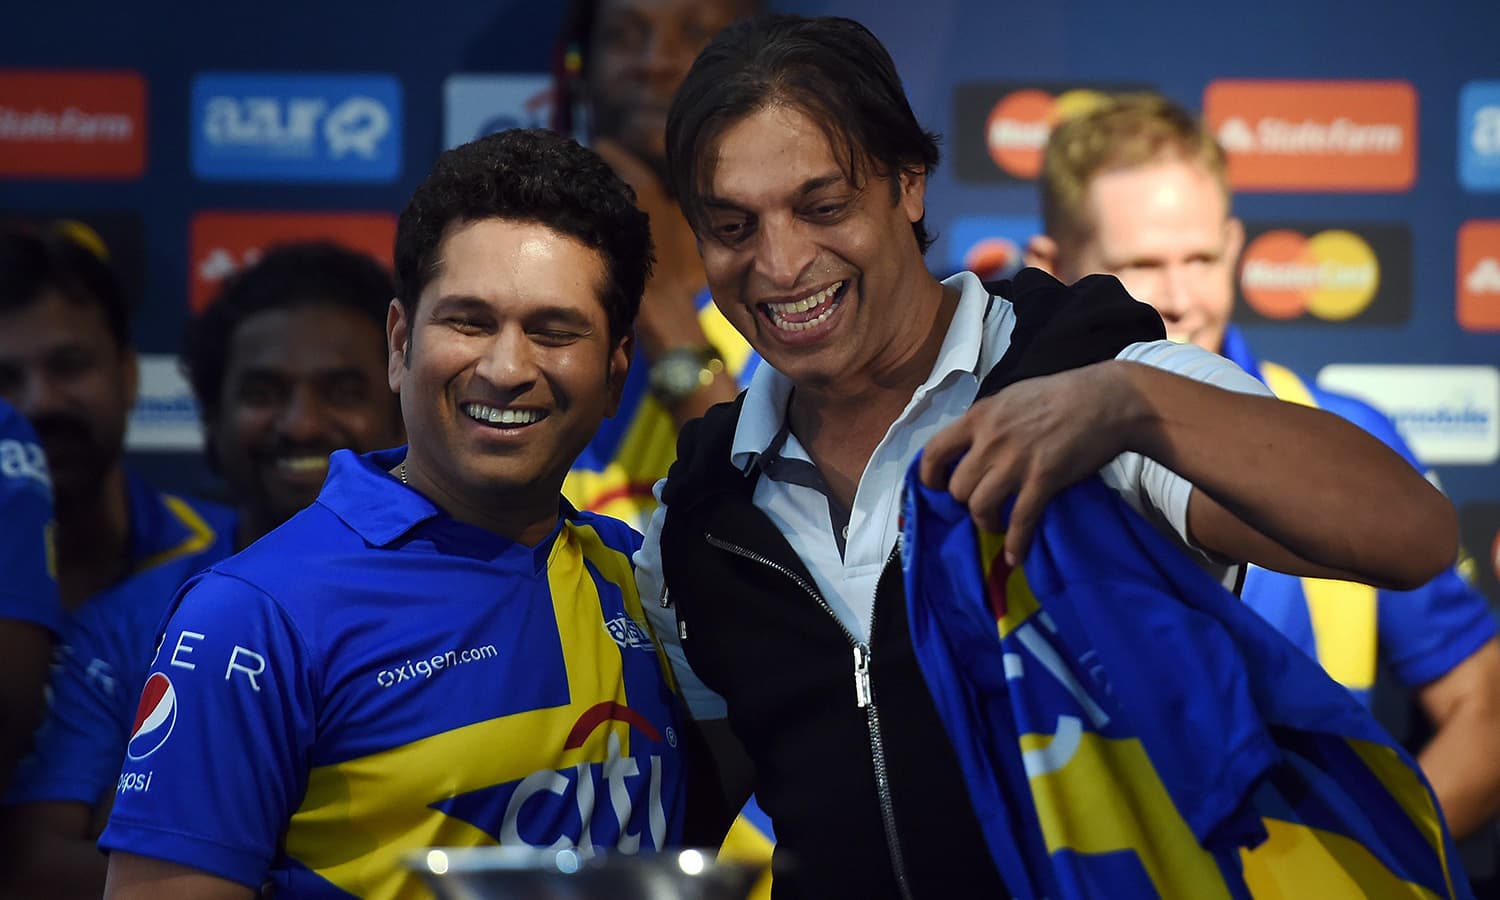 Former Pakistan's fast bowler Shoaib Akhtar (R) hugs retired Indian cricketer Sachin Tendulkar after he was selected for Tendulkar's team during a press conference in New York on November 5, 2015. Tendulkar and Warne will lead a lineup of renowned cricket players from around the world in the inaugural “Cricket All-Stars,” a three-game series to be played in Major League Baseball stadiums in New York , Houston and Los Angeles, to promote cricket the US. AFP PHOTO/JEWEL SAMAD